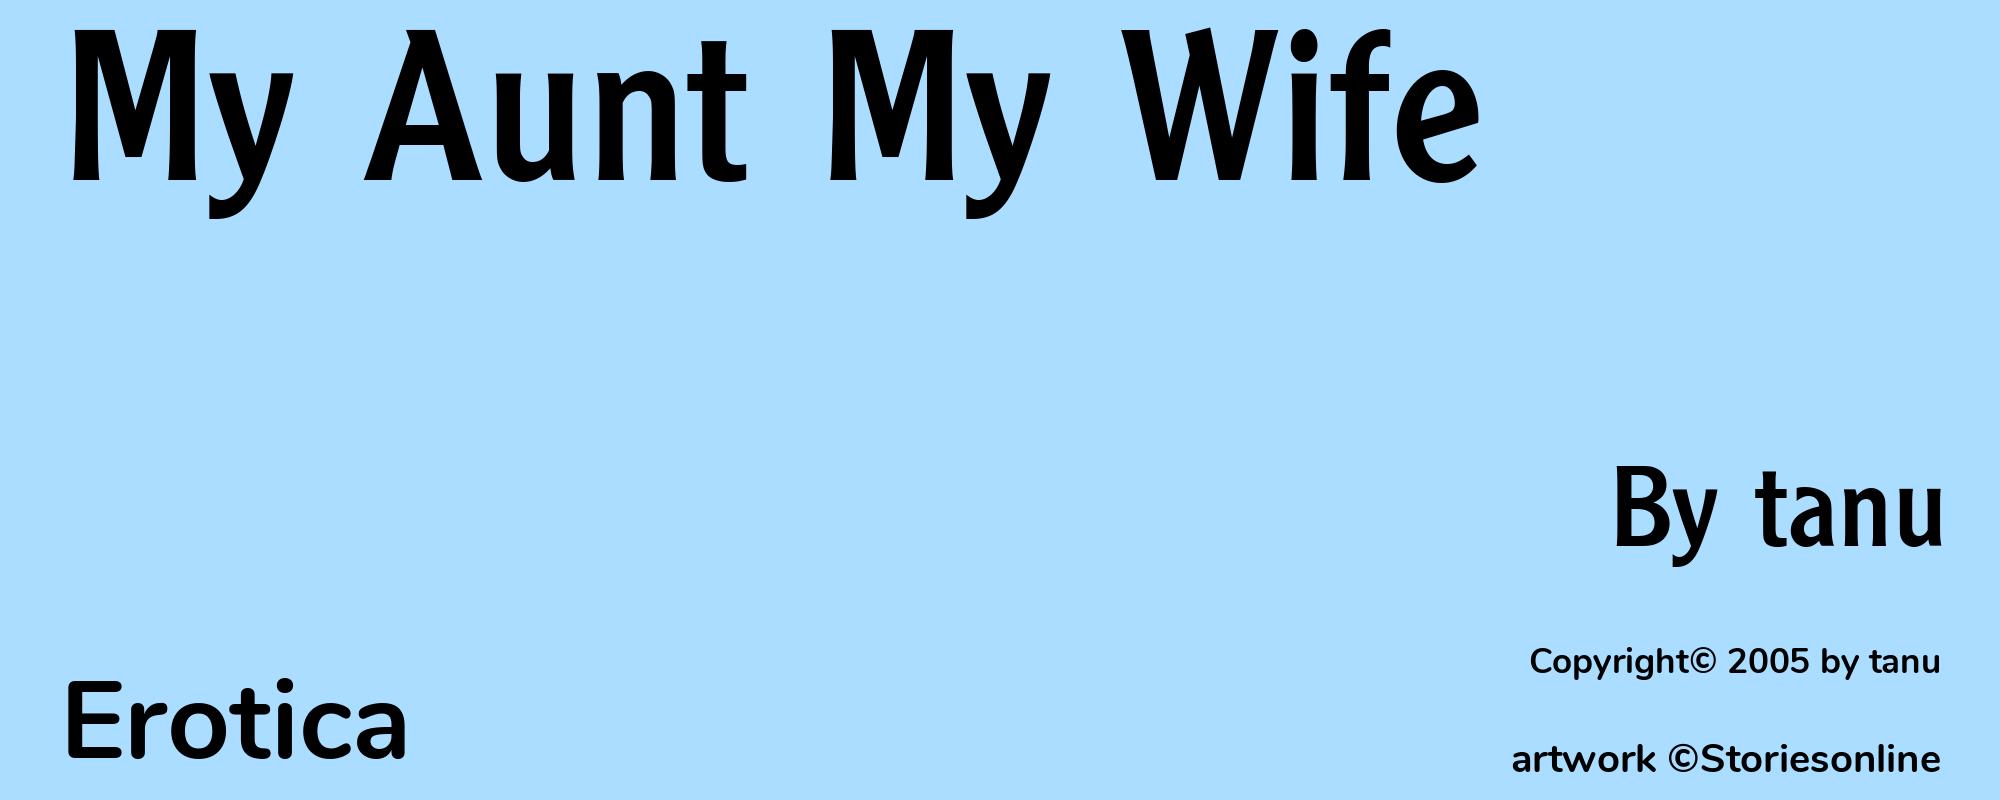 My Aunt My Wife - Cover